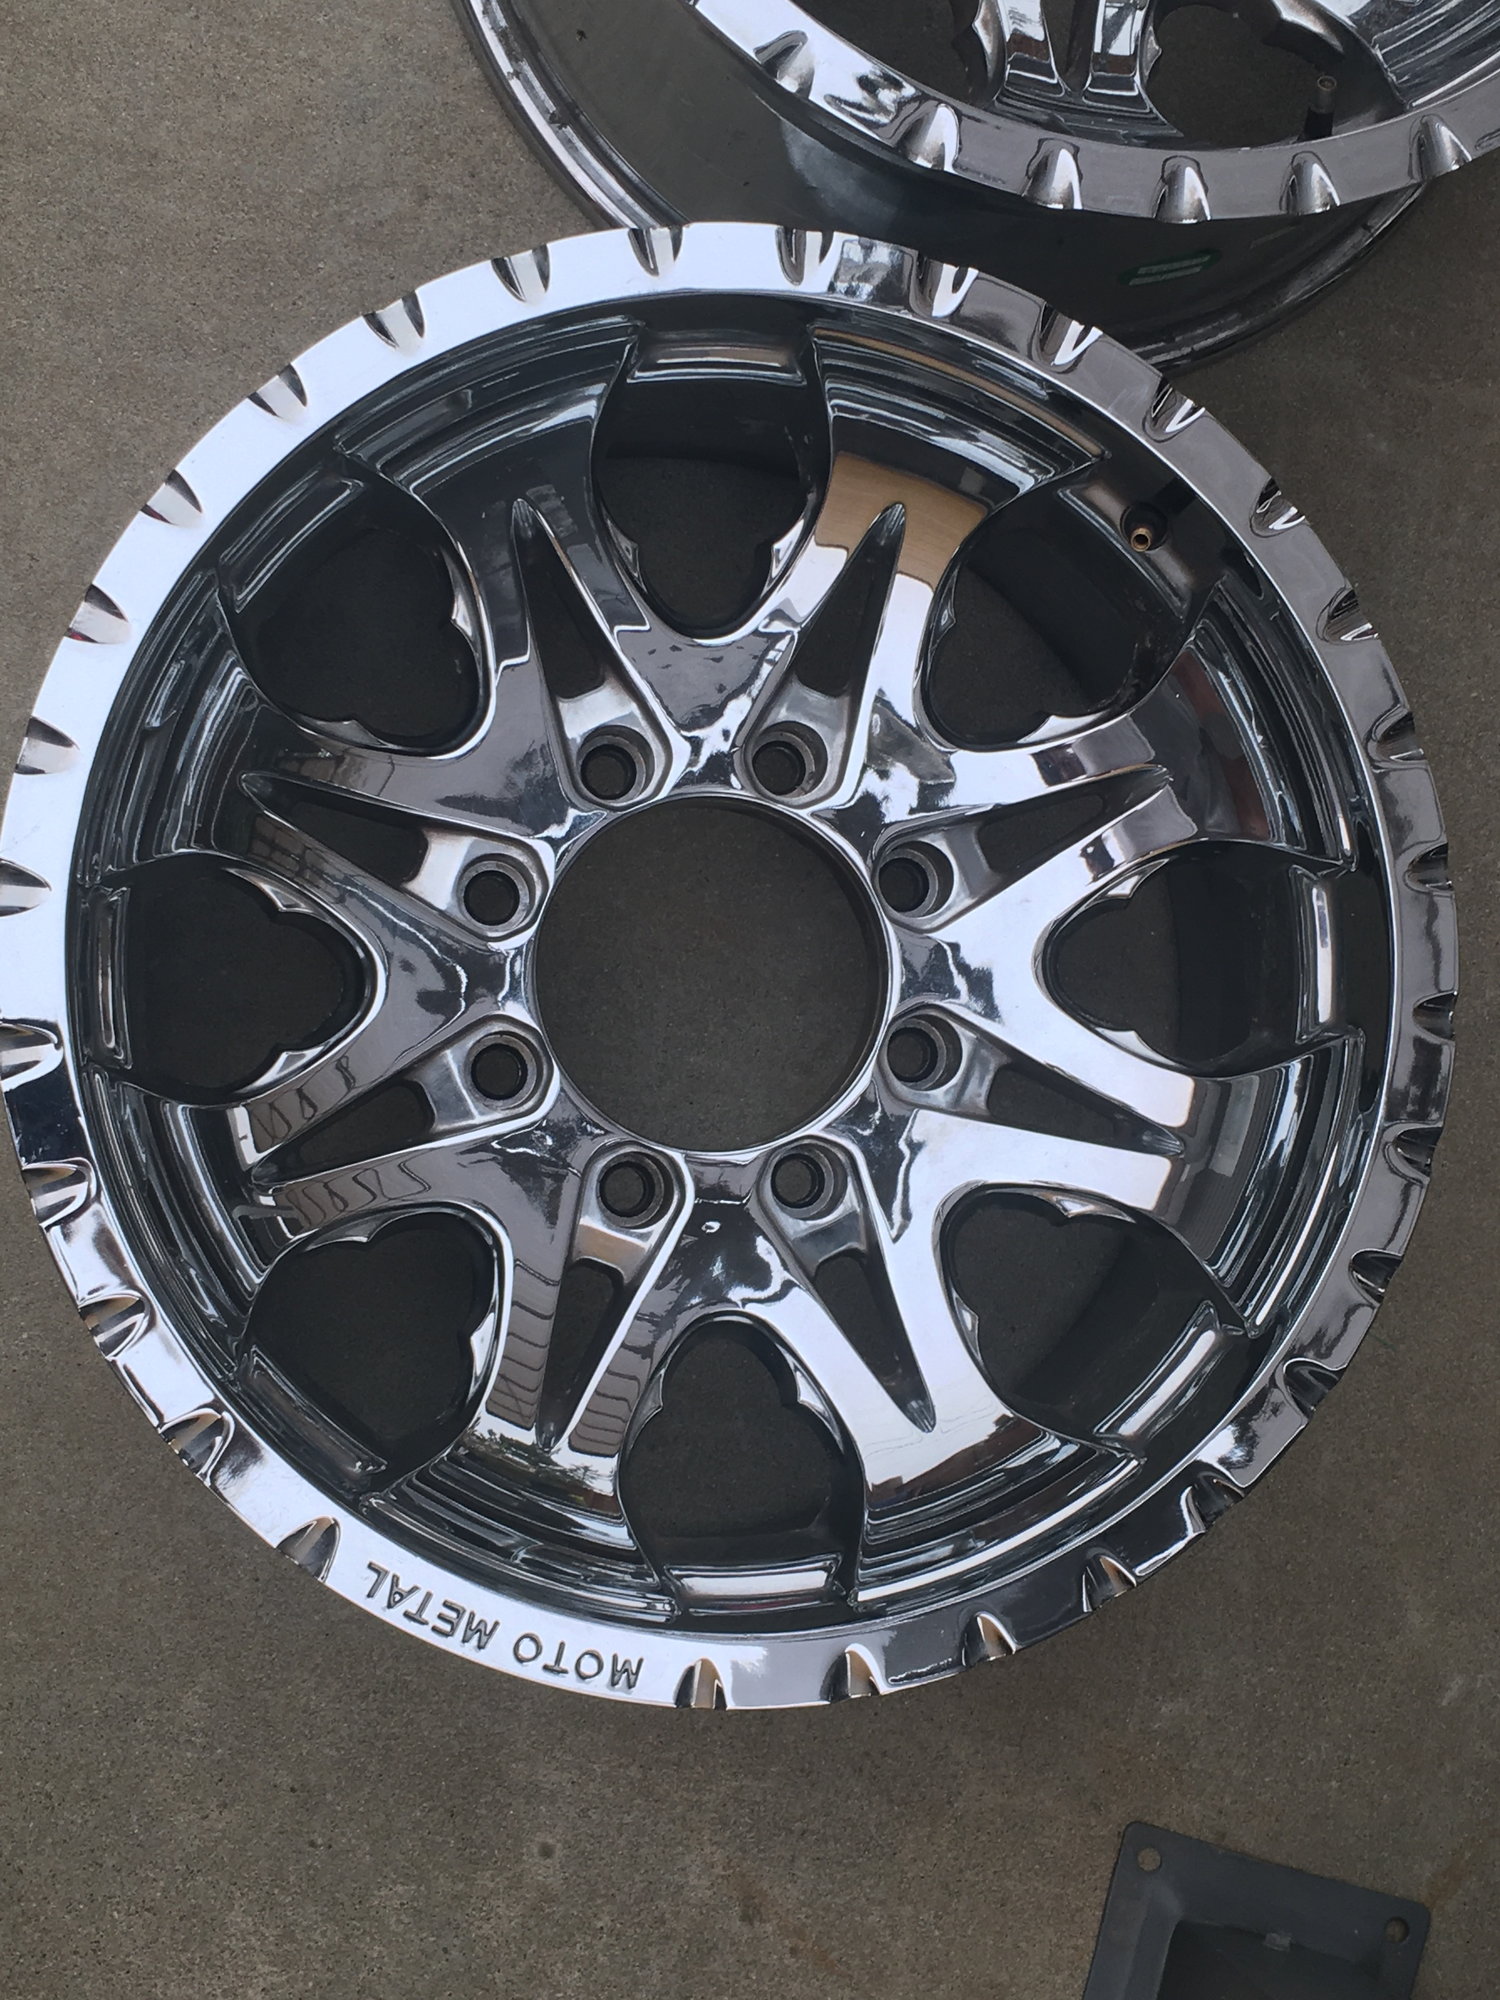 Wheels and Tires/Axles - Moto Metal MO950 18x9 Rims - 8x170 bolt pattern - Used - 1999 to 2005 Ford Excursion - 1999 to 2005 Ford F-350 Super Duty - San Jose, CA 95119, United States